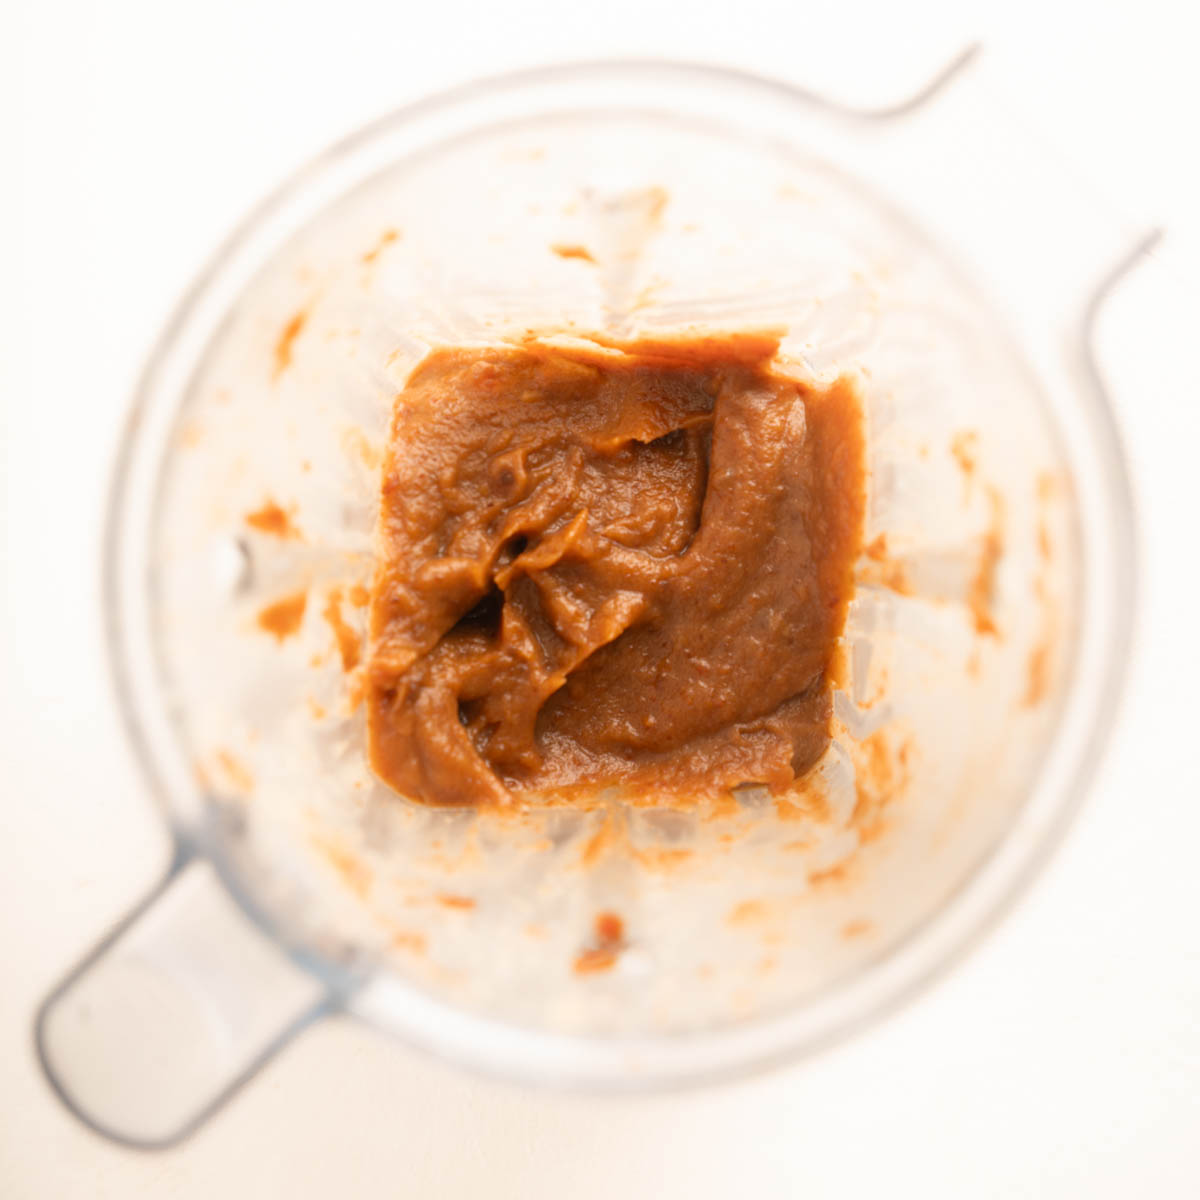 Top down of date caramel in a high powered blender